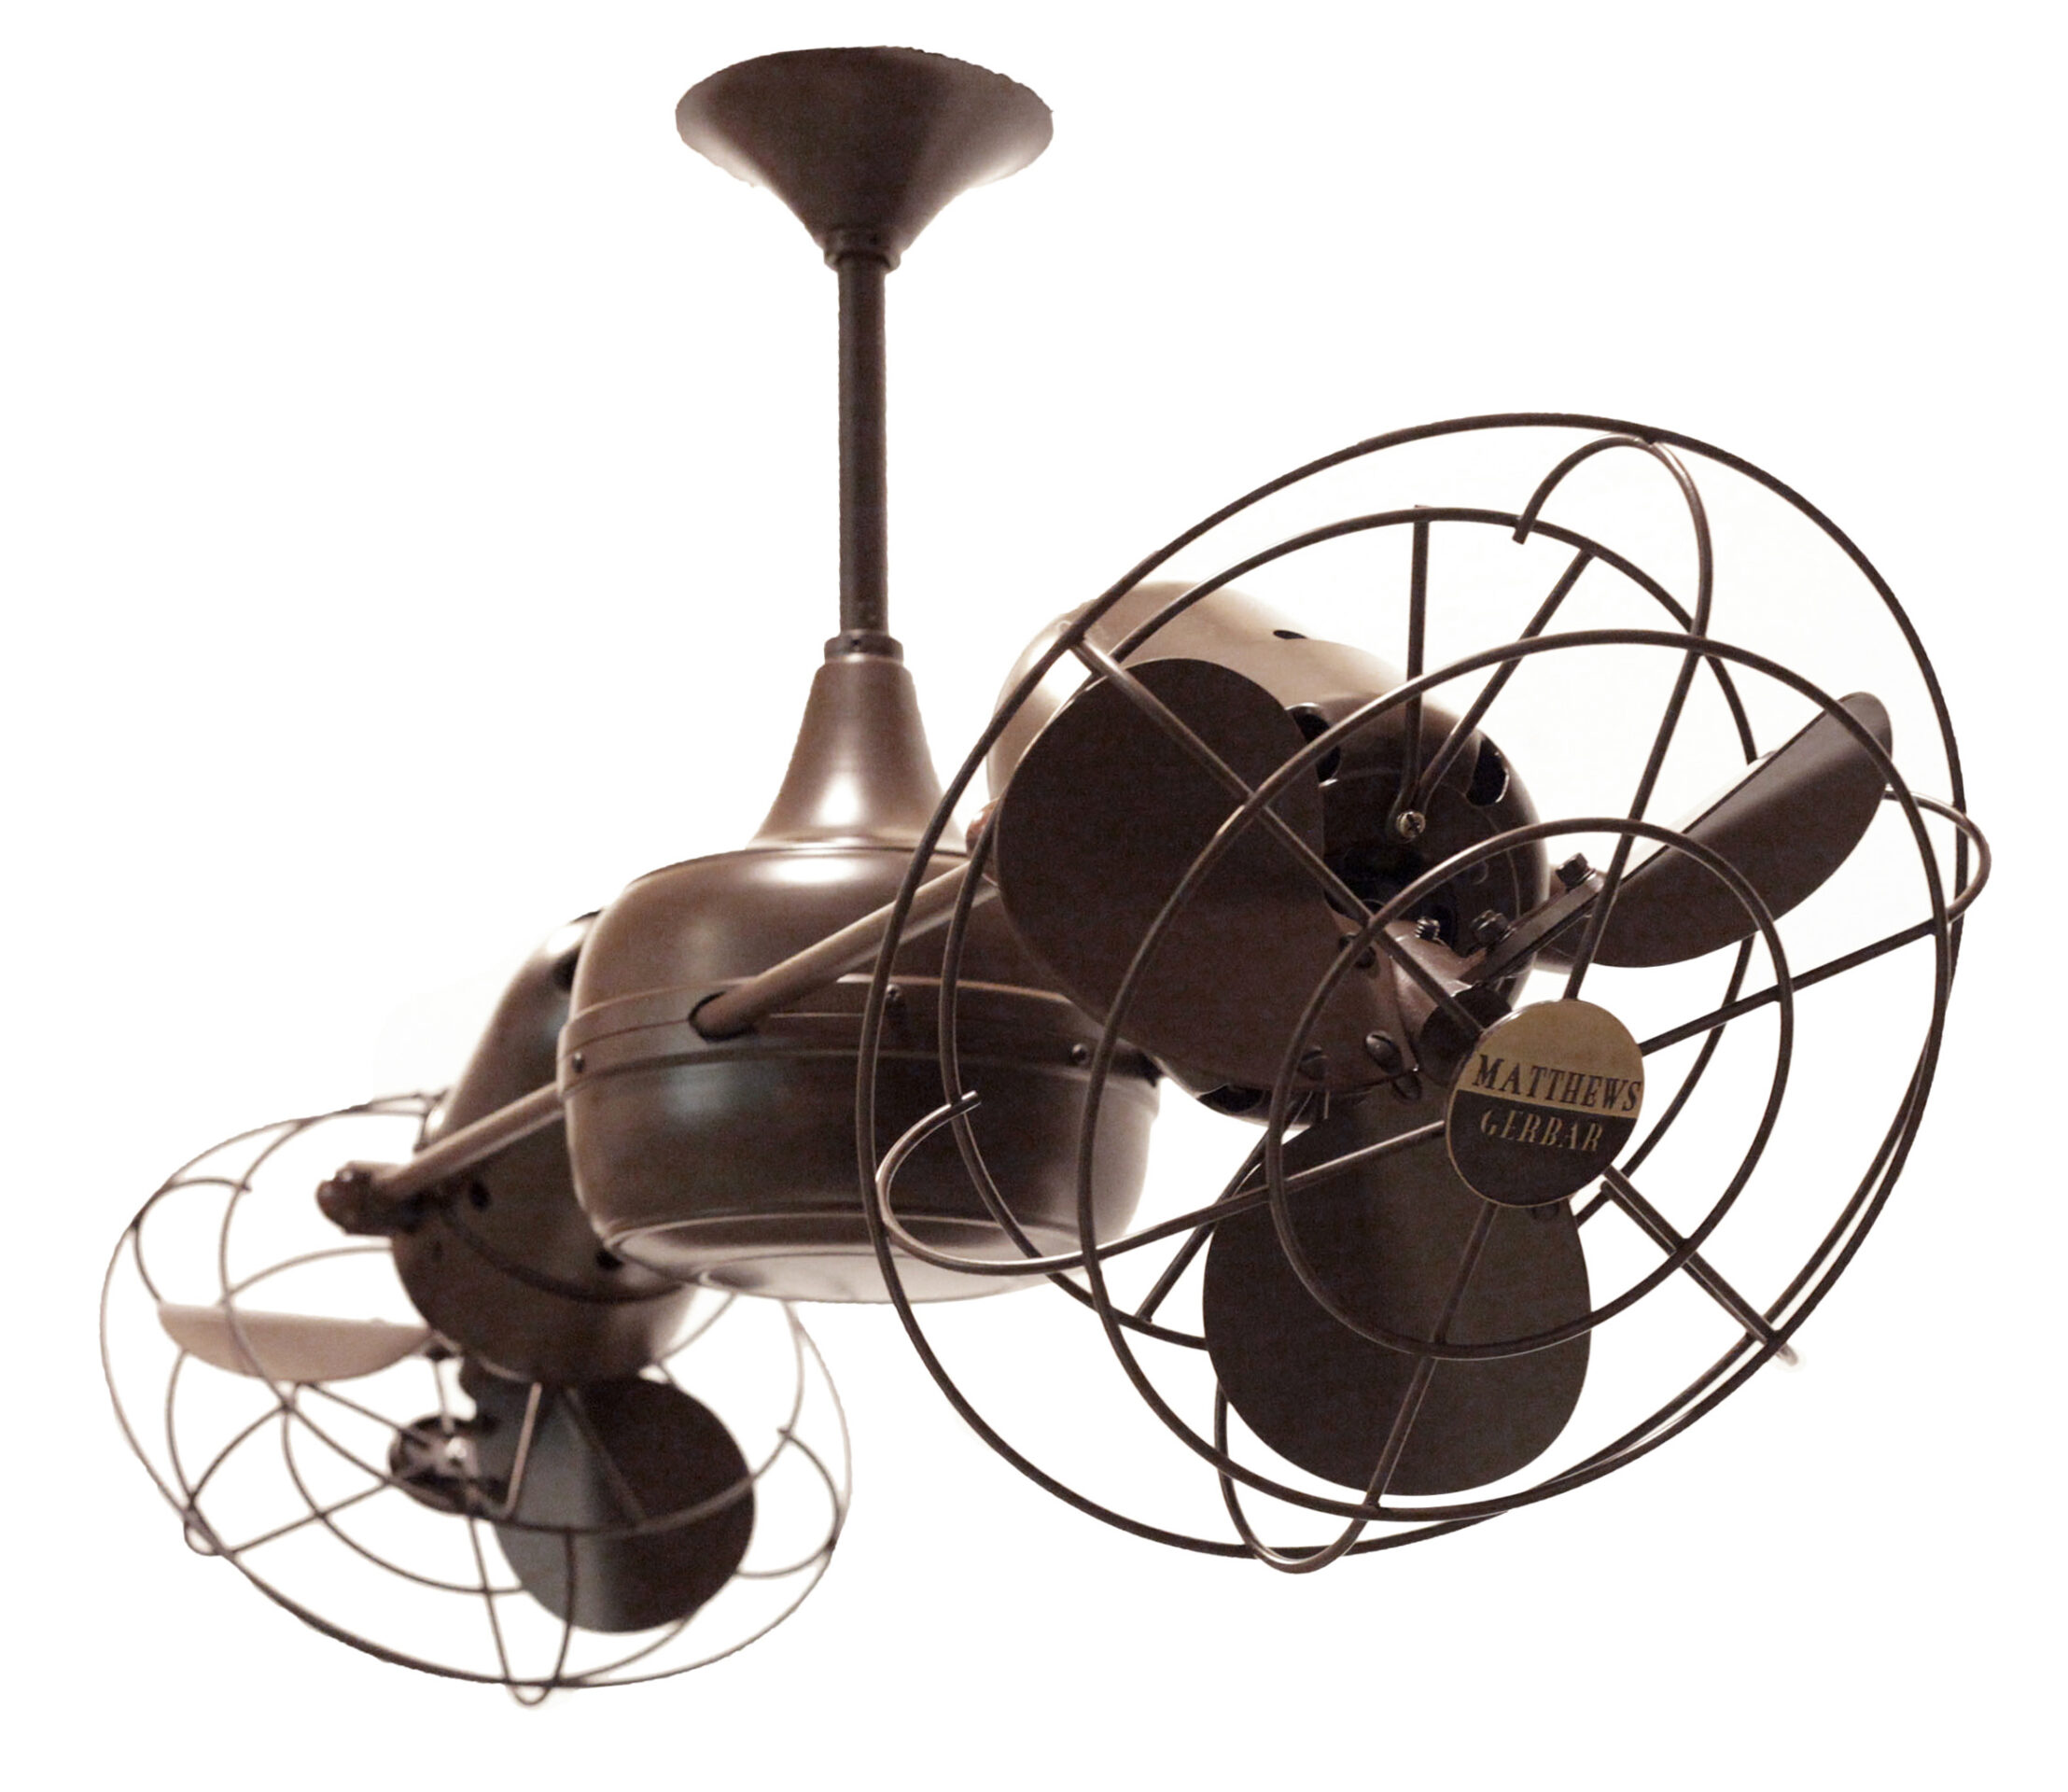 Duplo Dinamico Rotational Dual Head Ceiling Fan in Bronzette Finish with Metal Blades